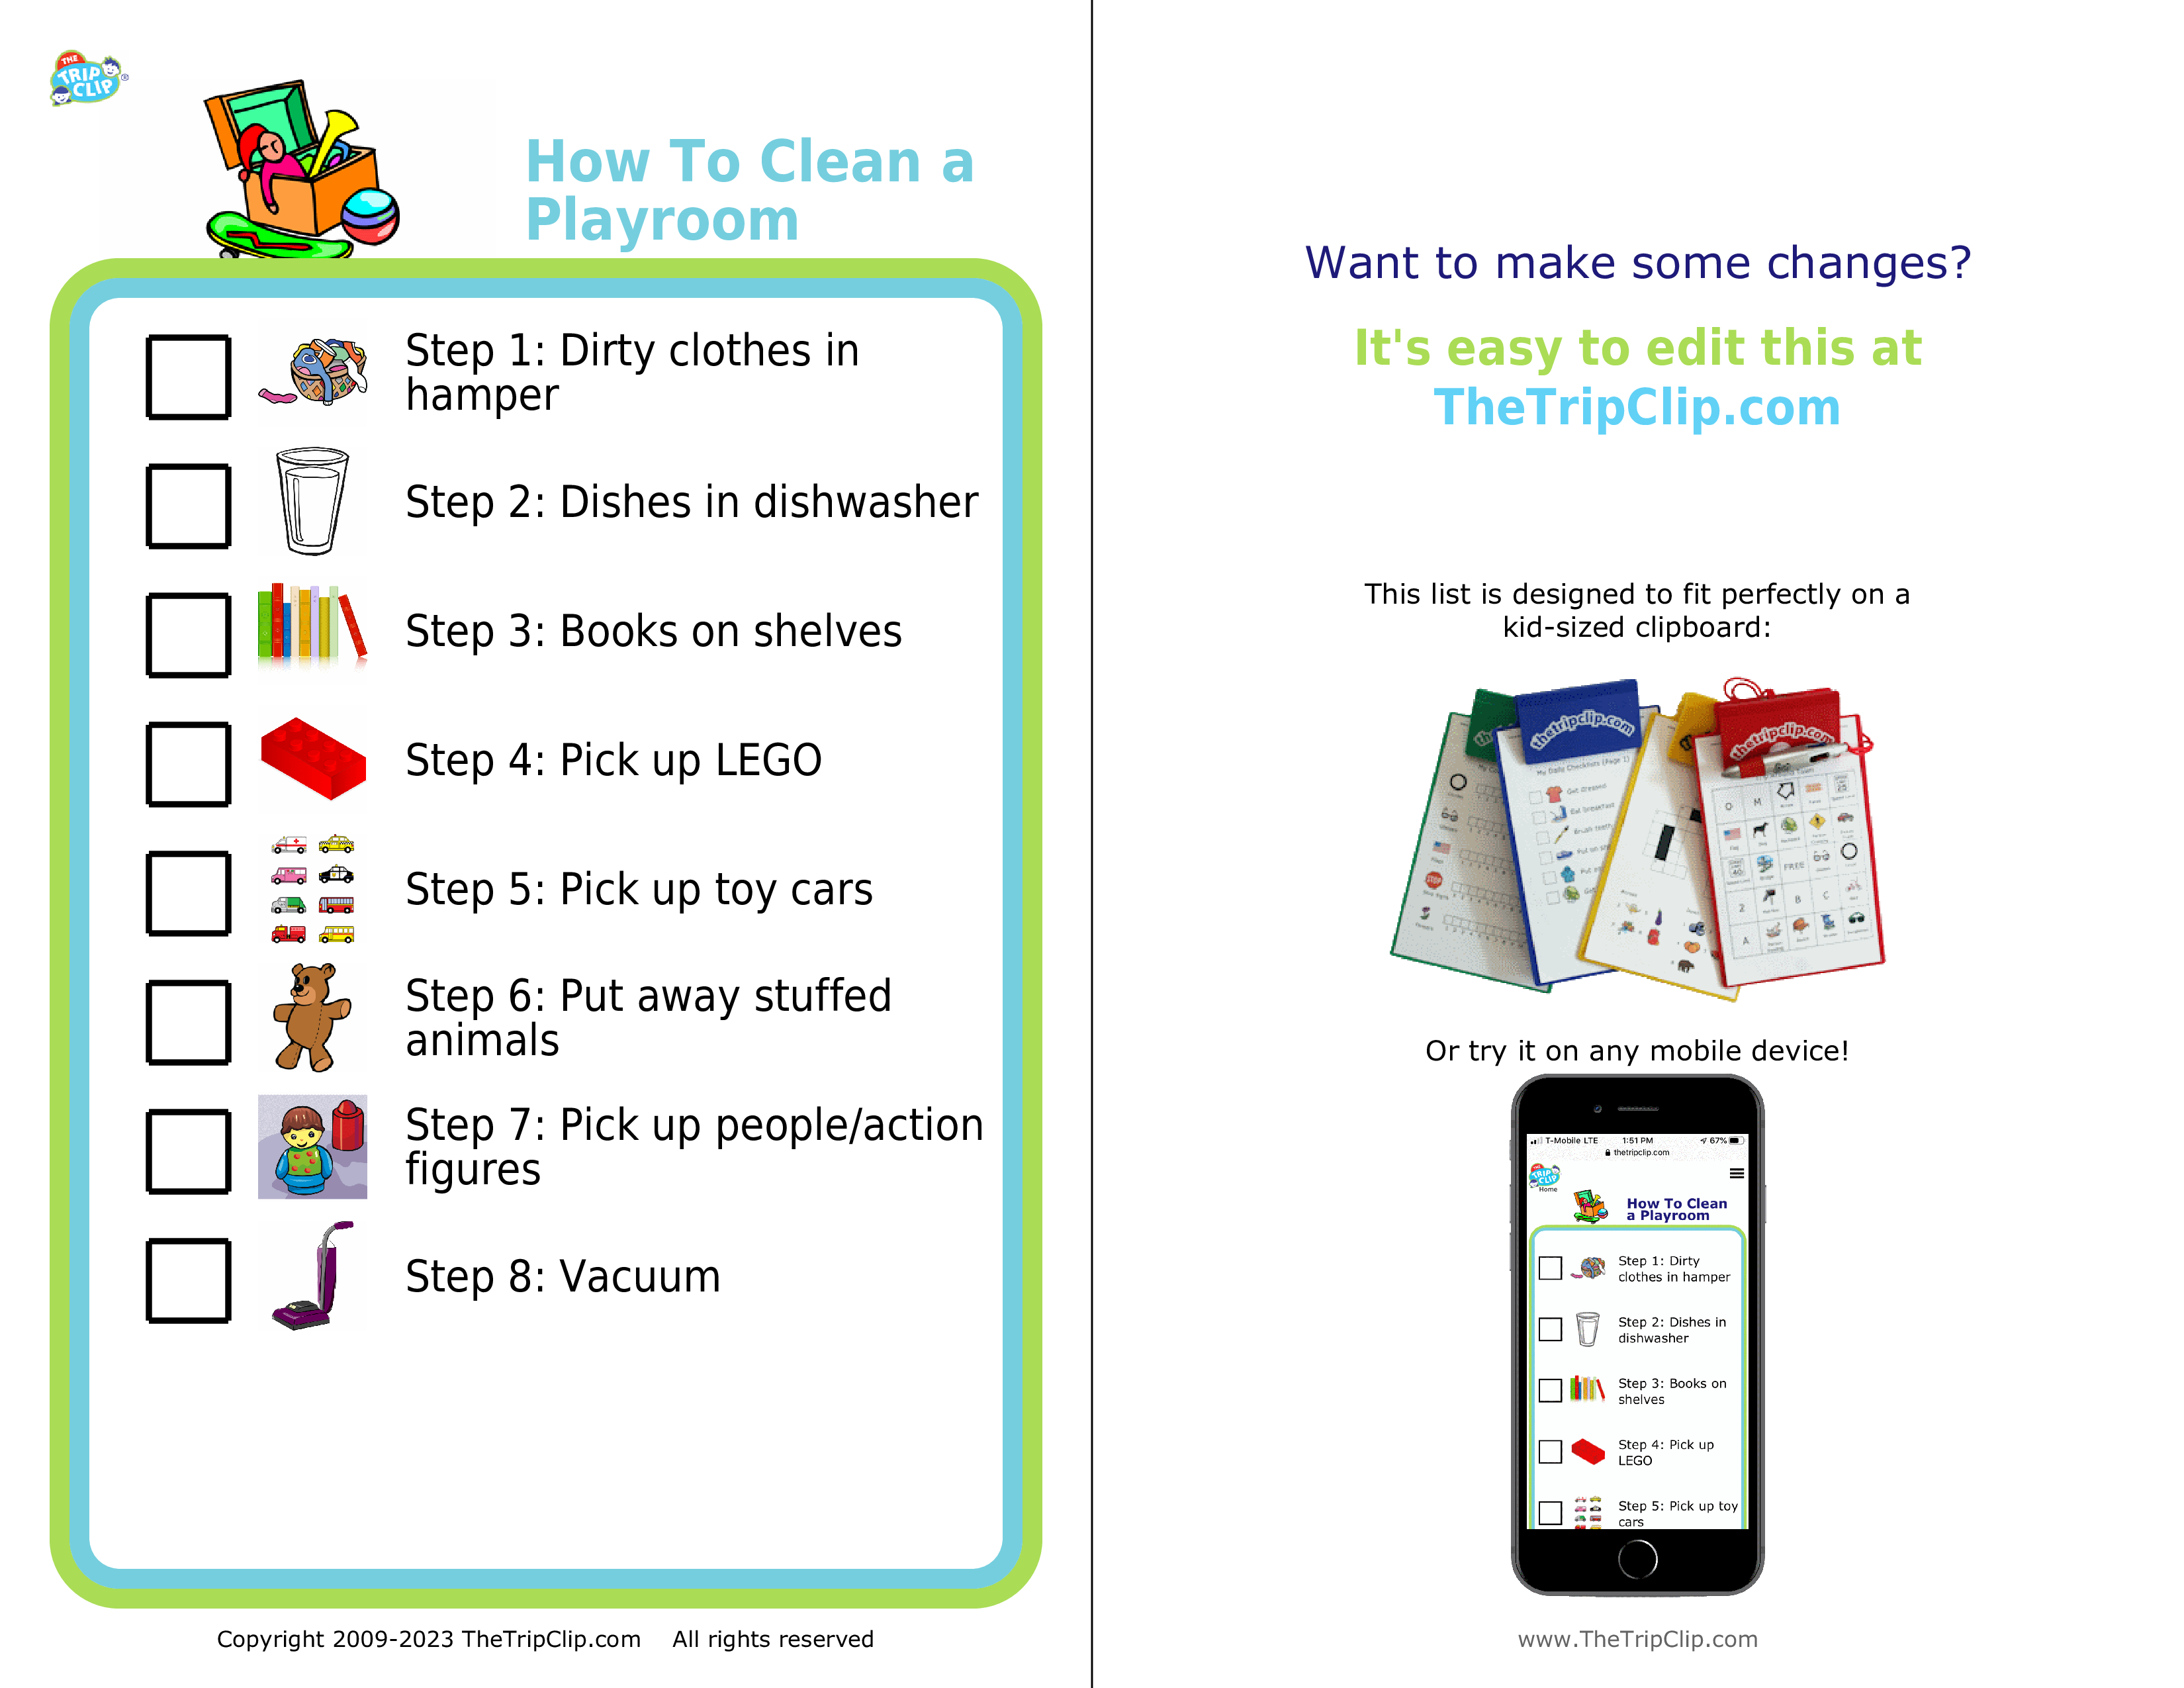 Picture checklists to teach a kid to clean a playroom in 8 steps